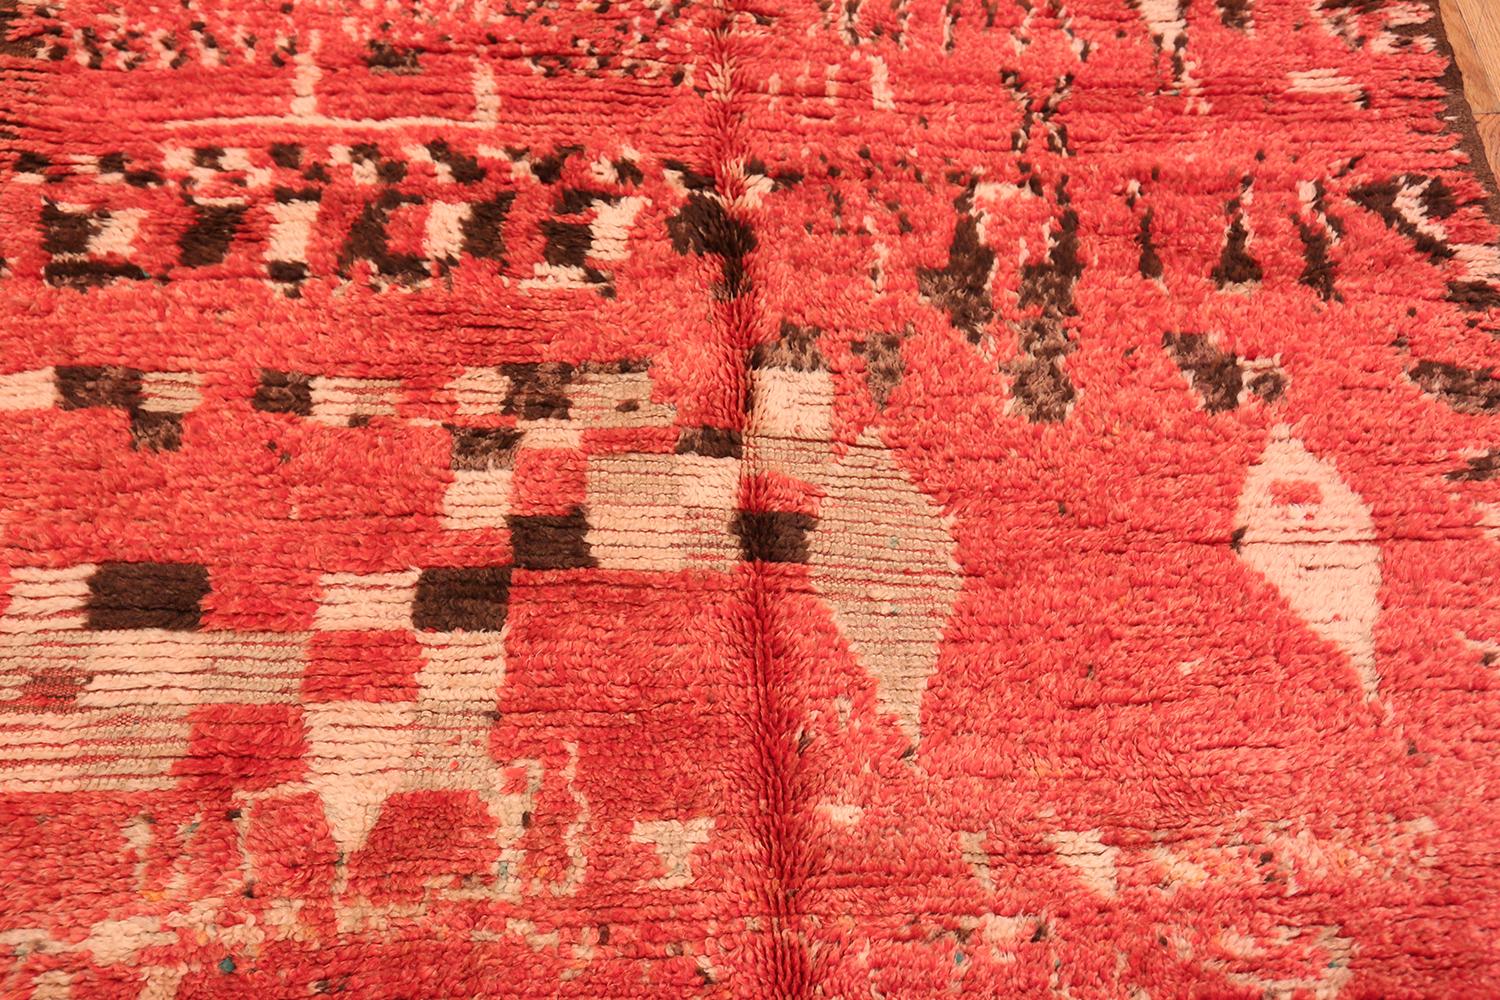 Hand-Knotted Vintage Berber Moroccan Red Rug. Size: 5 ft. 1 in x 11 ft. 5 in